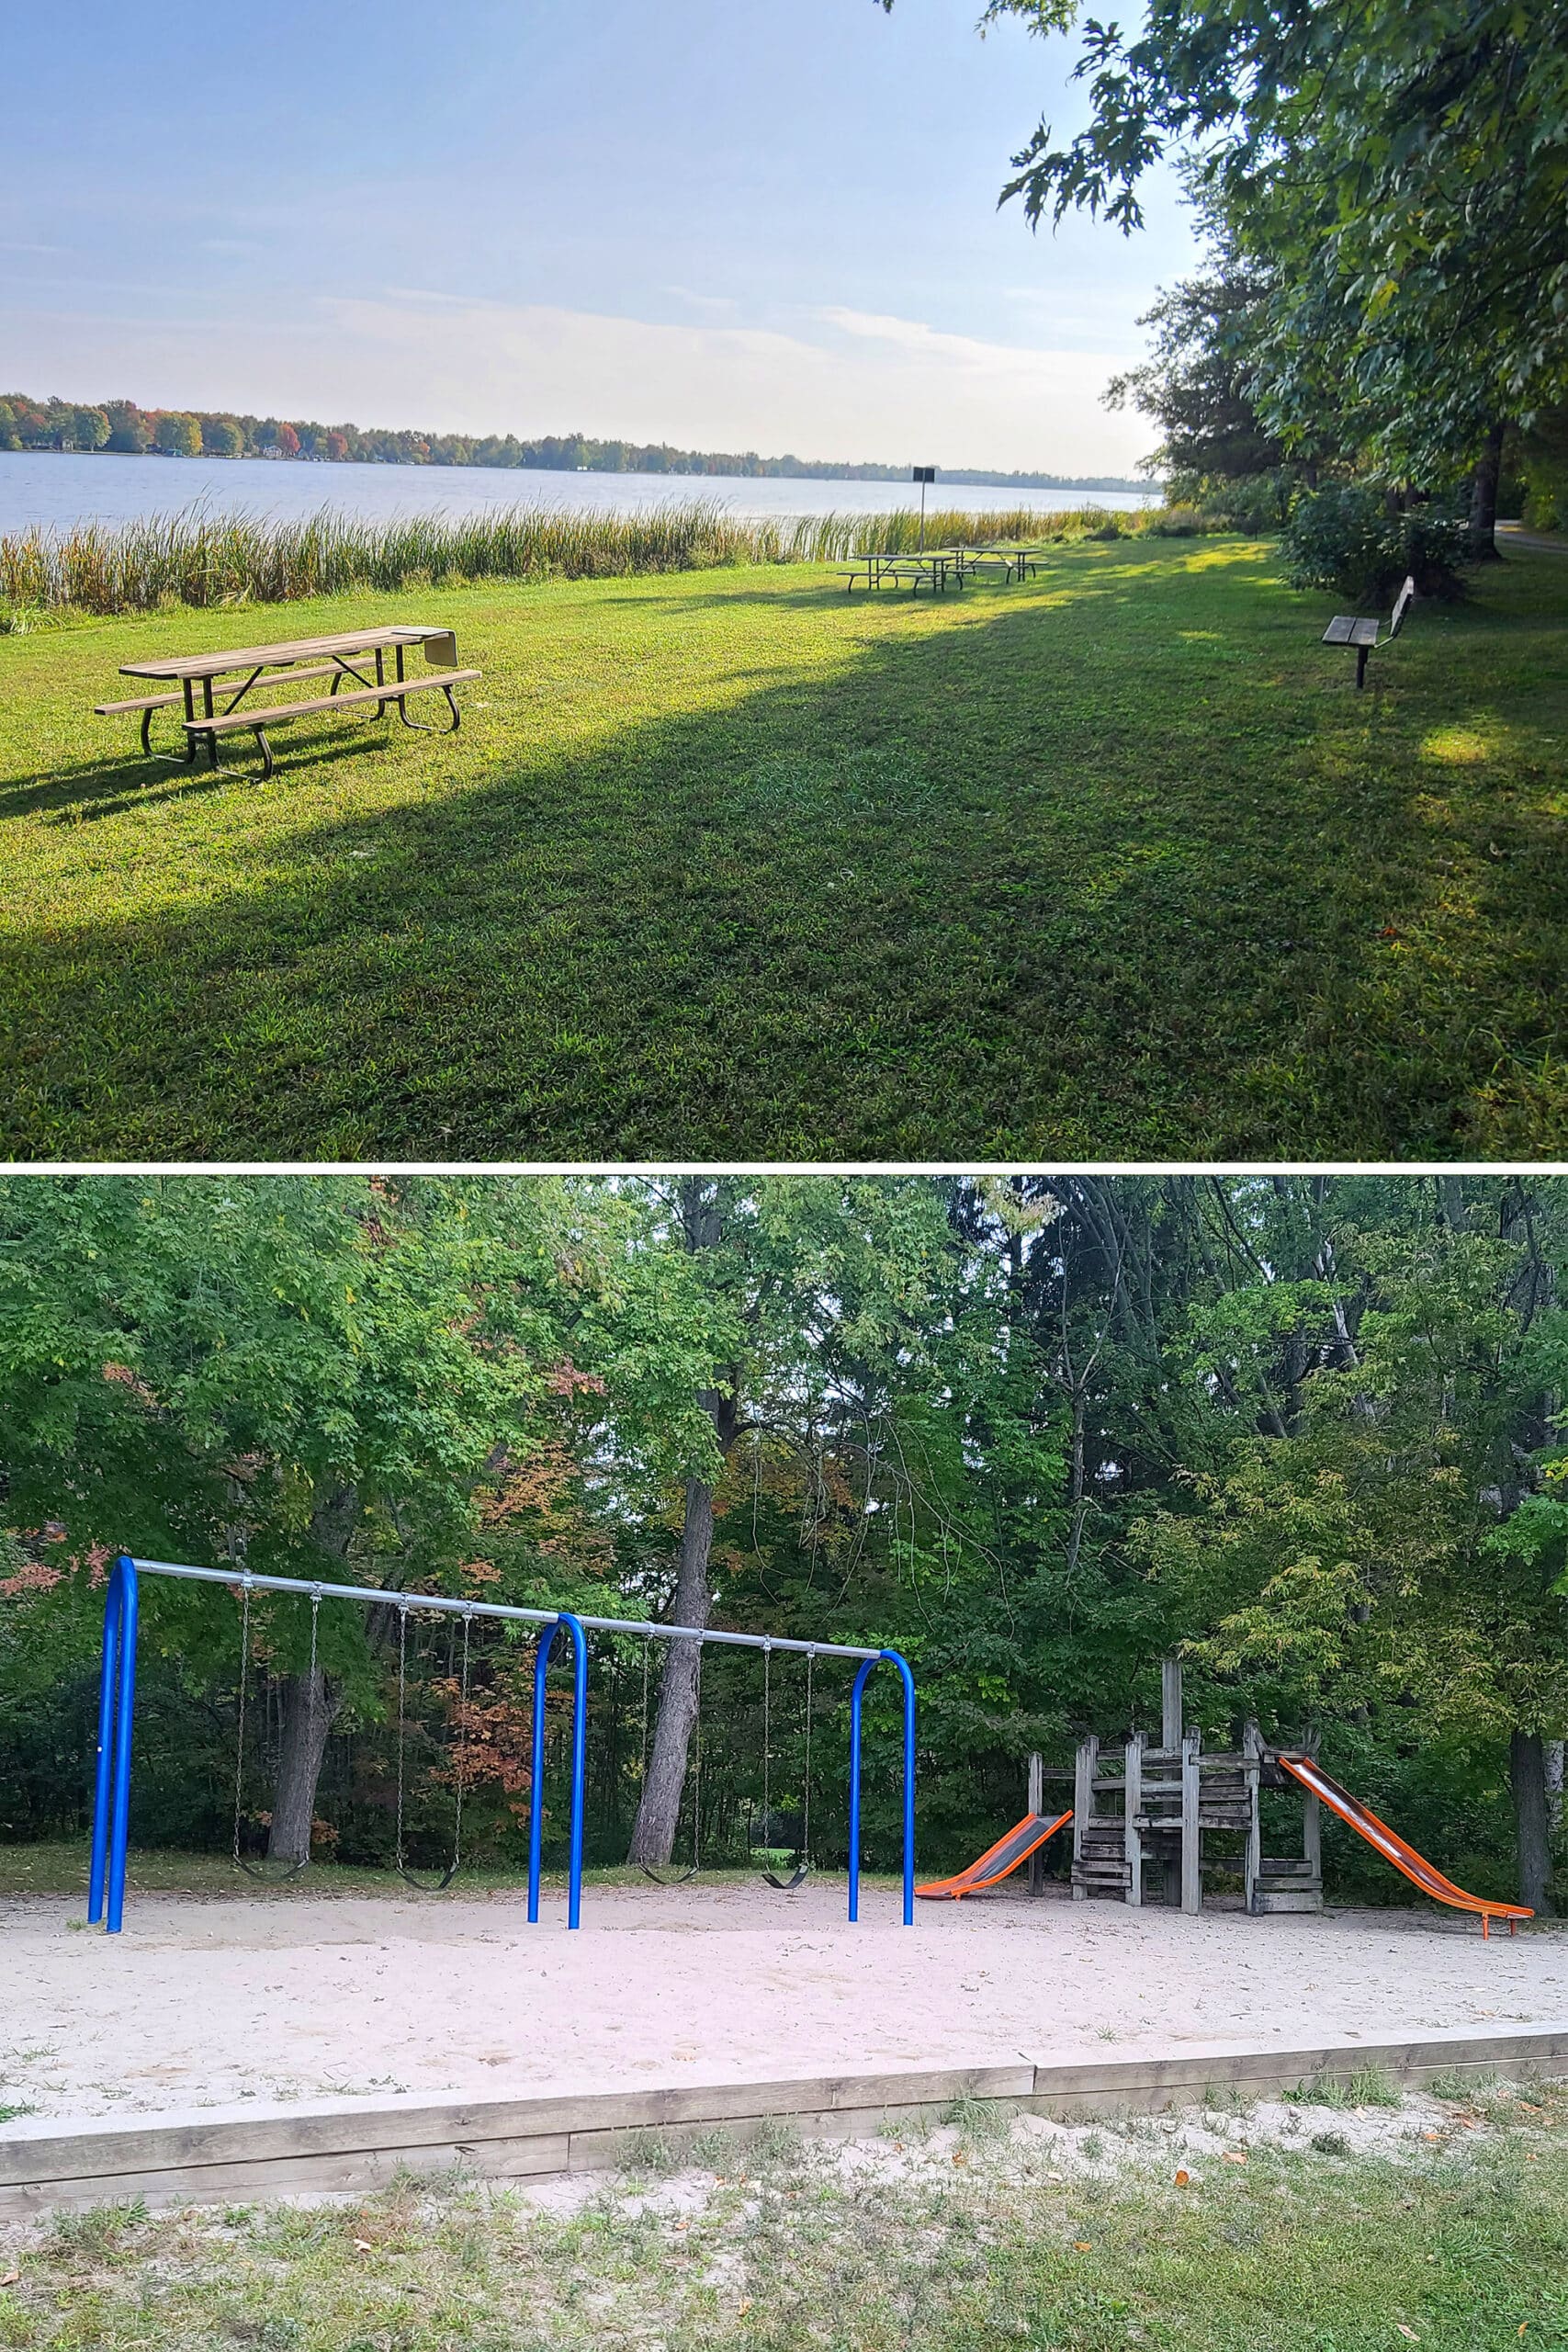 2 part image showing an open grassy area with picnic tables overlooking the rideau river, and a playground.